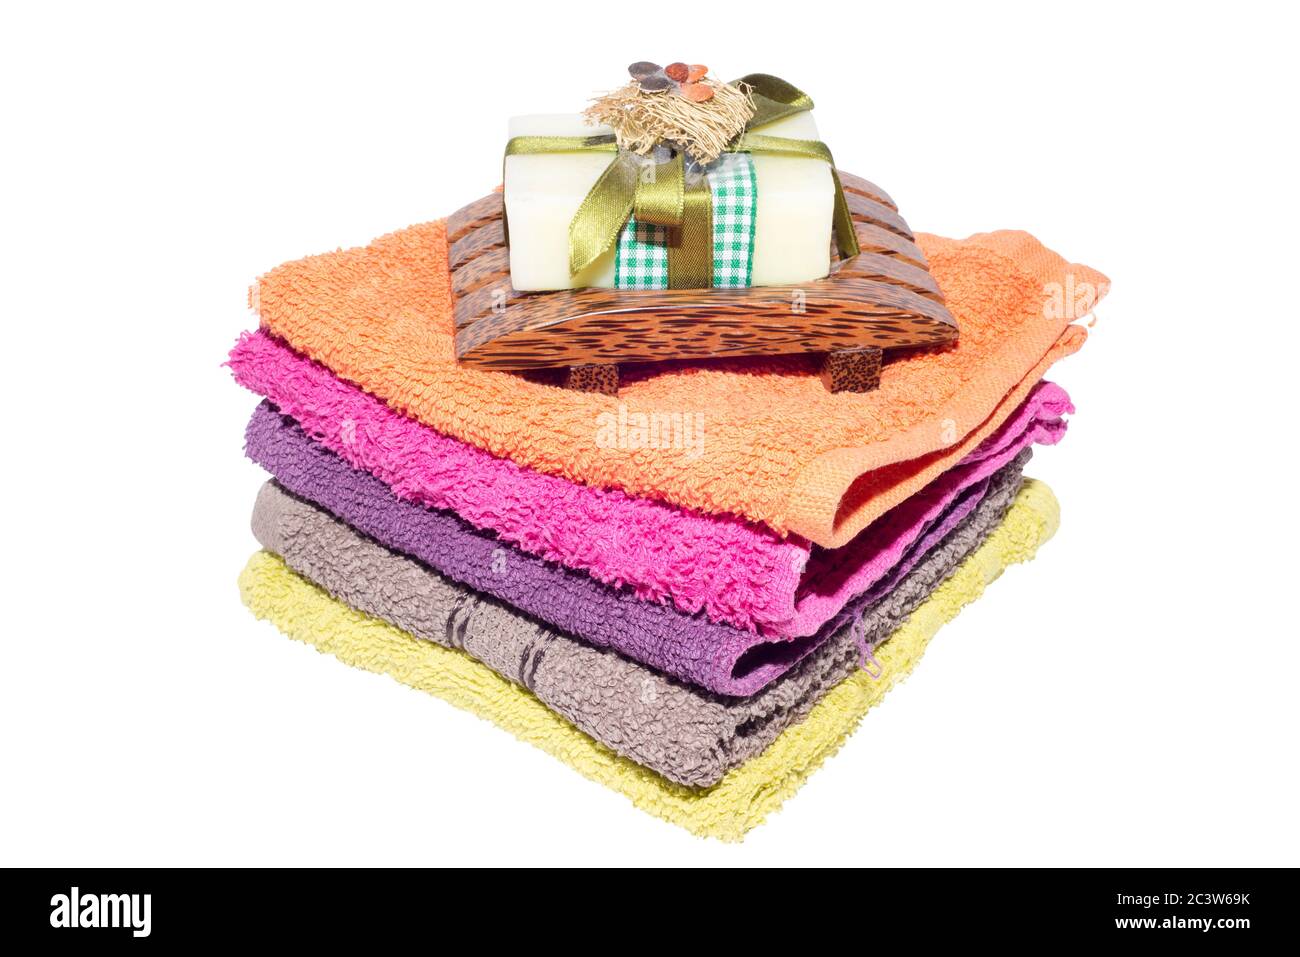 soap and dish on top of facecloths of various shades Stock Photo